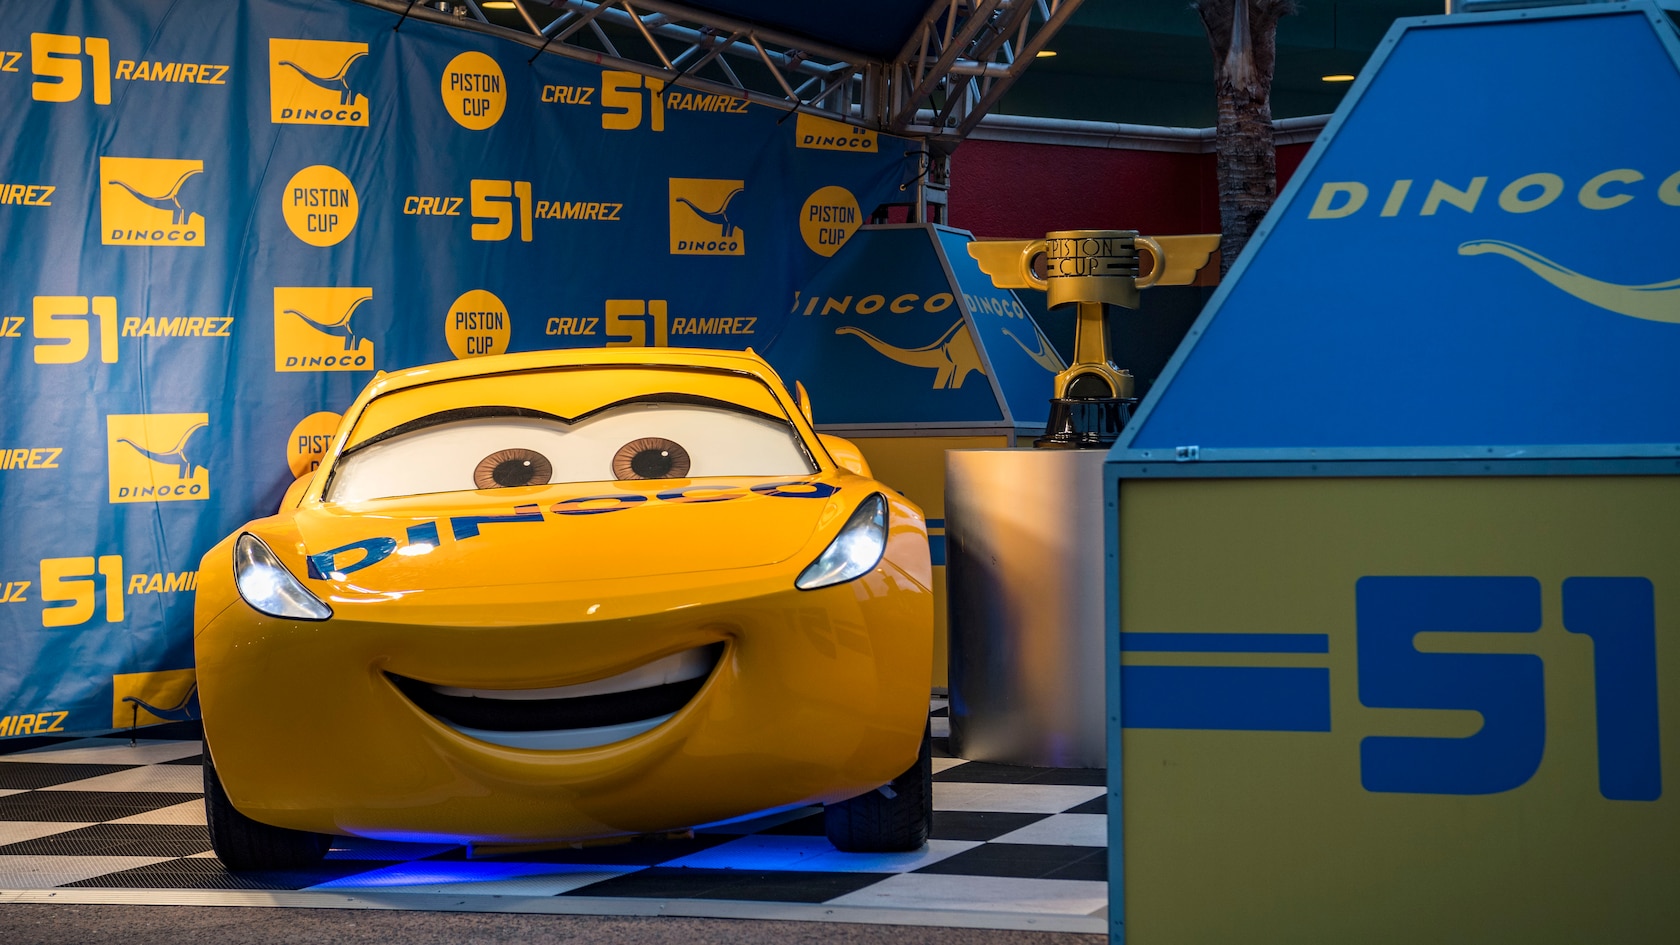 PHOTOS: New Inside Look at Lightning McQueen's Racing Academy at Disney's  Hollywood Studios - WDW News Today